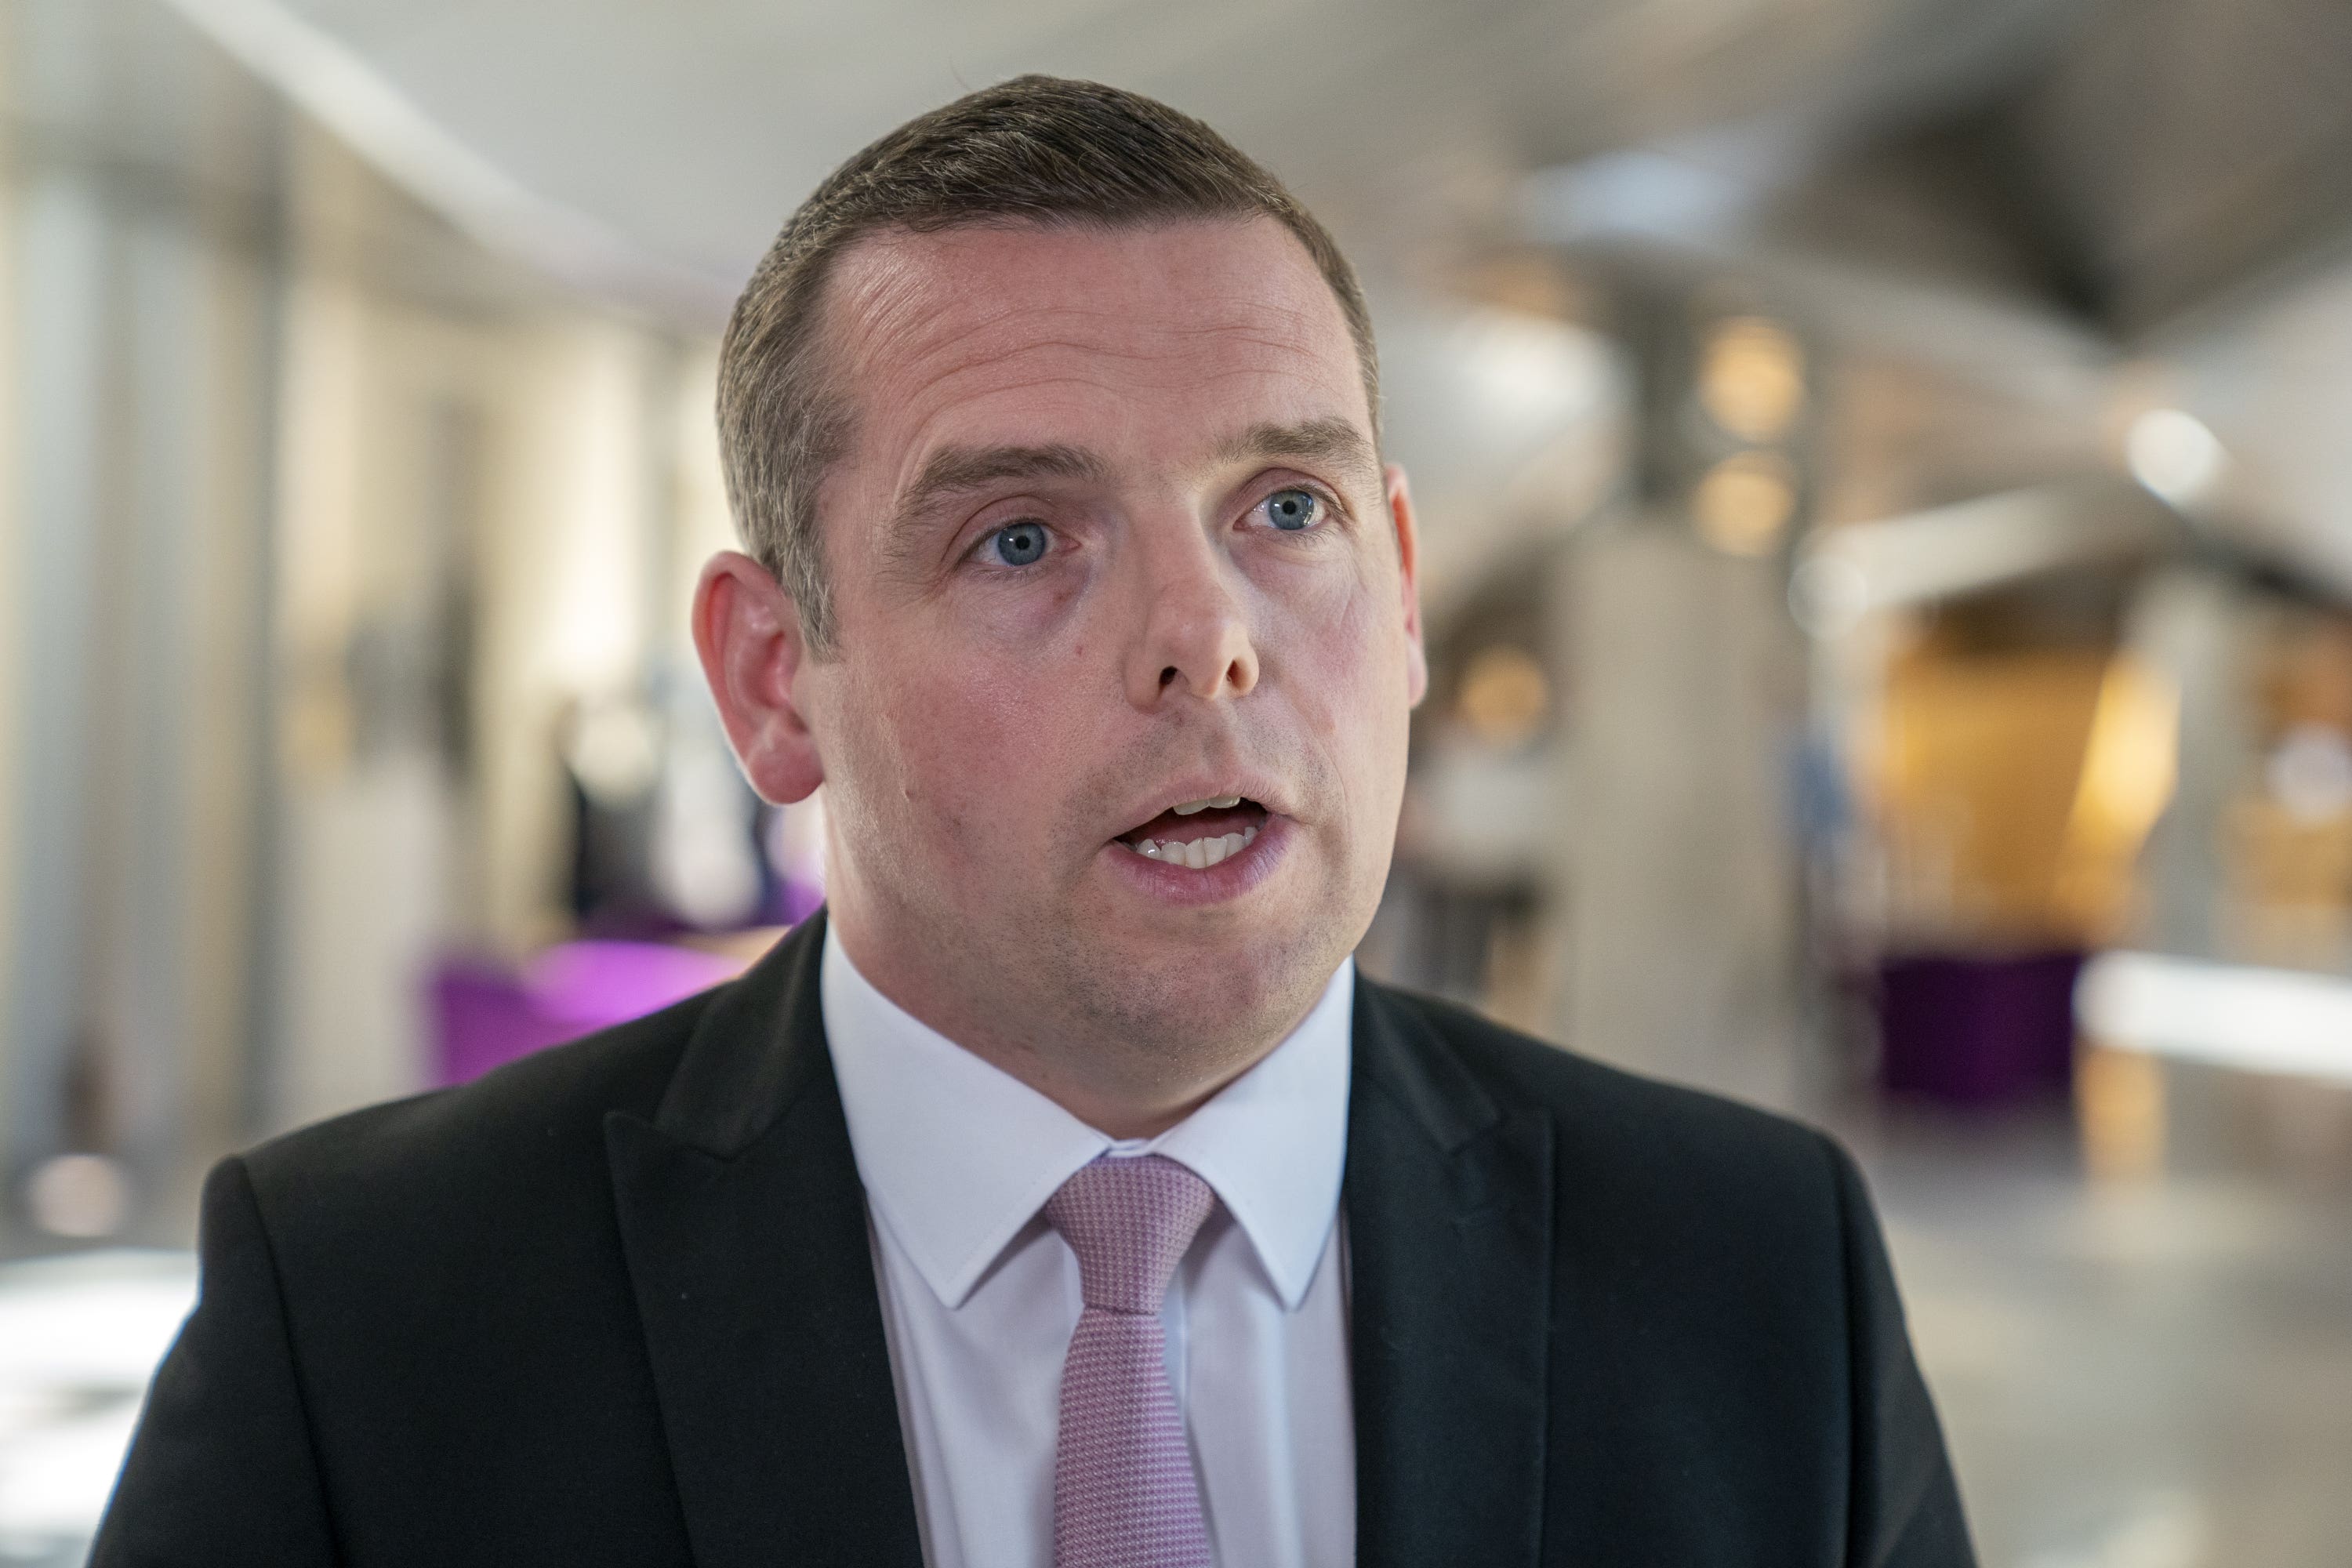 Scottish Conservative leader Douglas Ross said Alister Jack has apologised for deleting his WhatsApp messages.